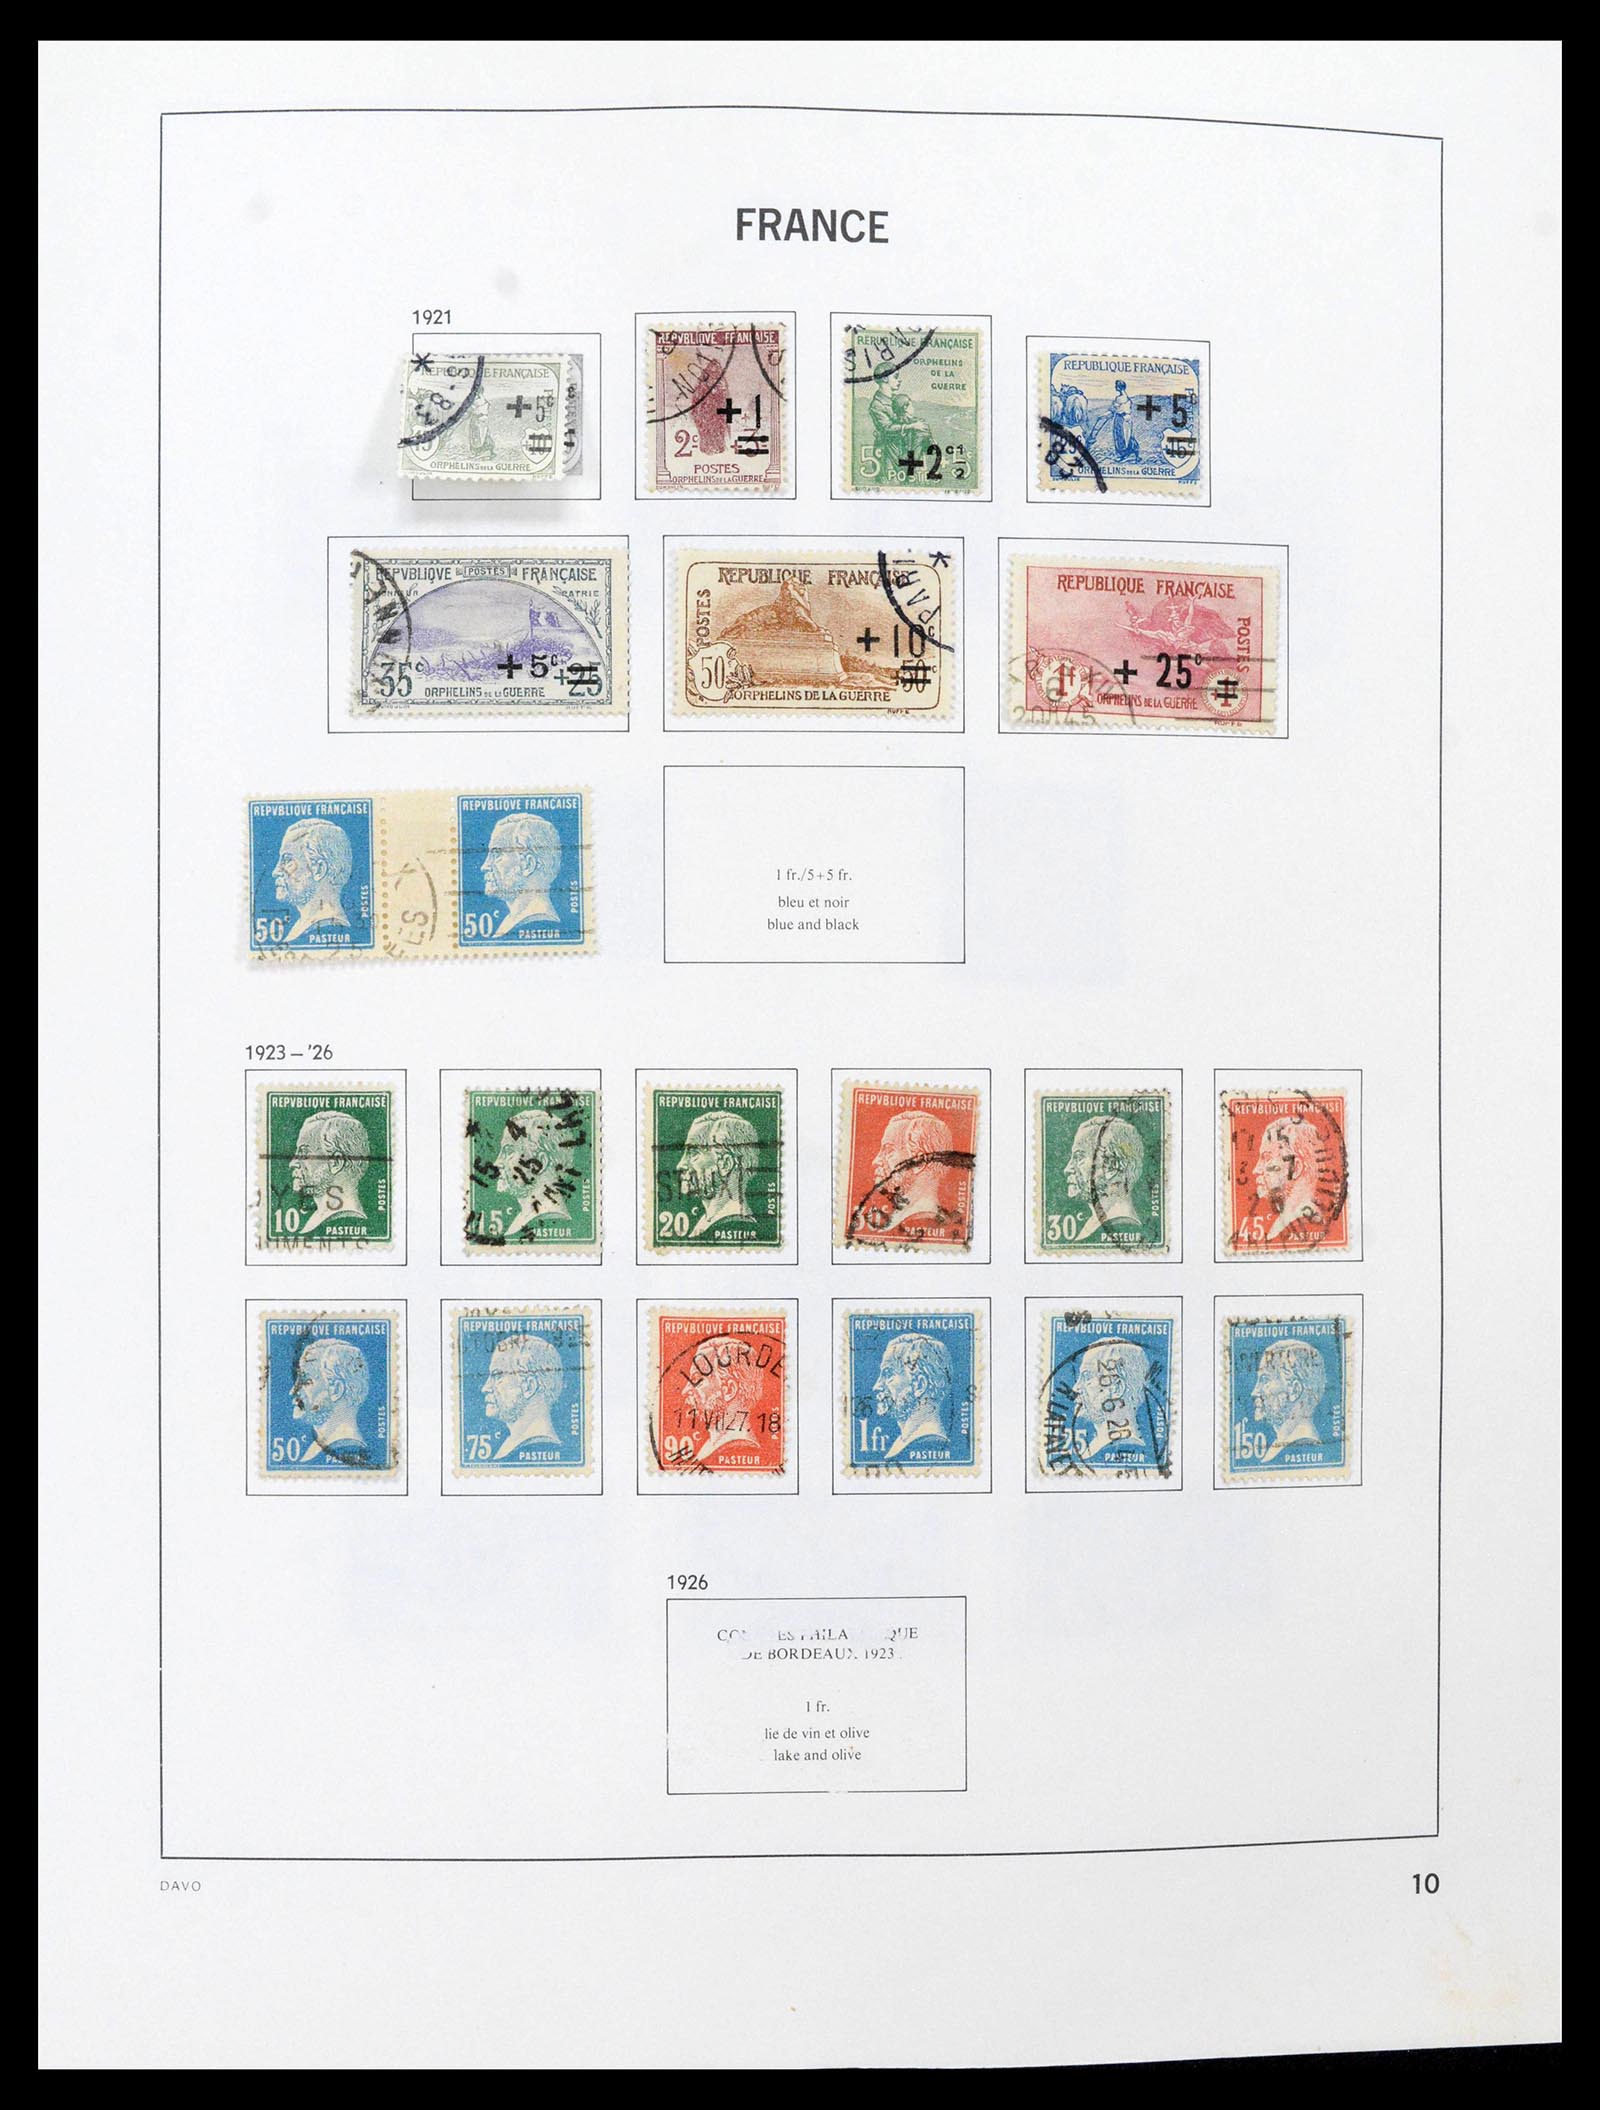 39164 0010 - Stamp collection 39164 France 1849-1981.